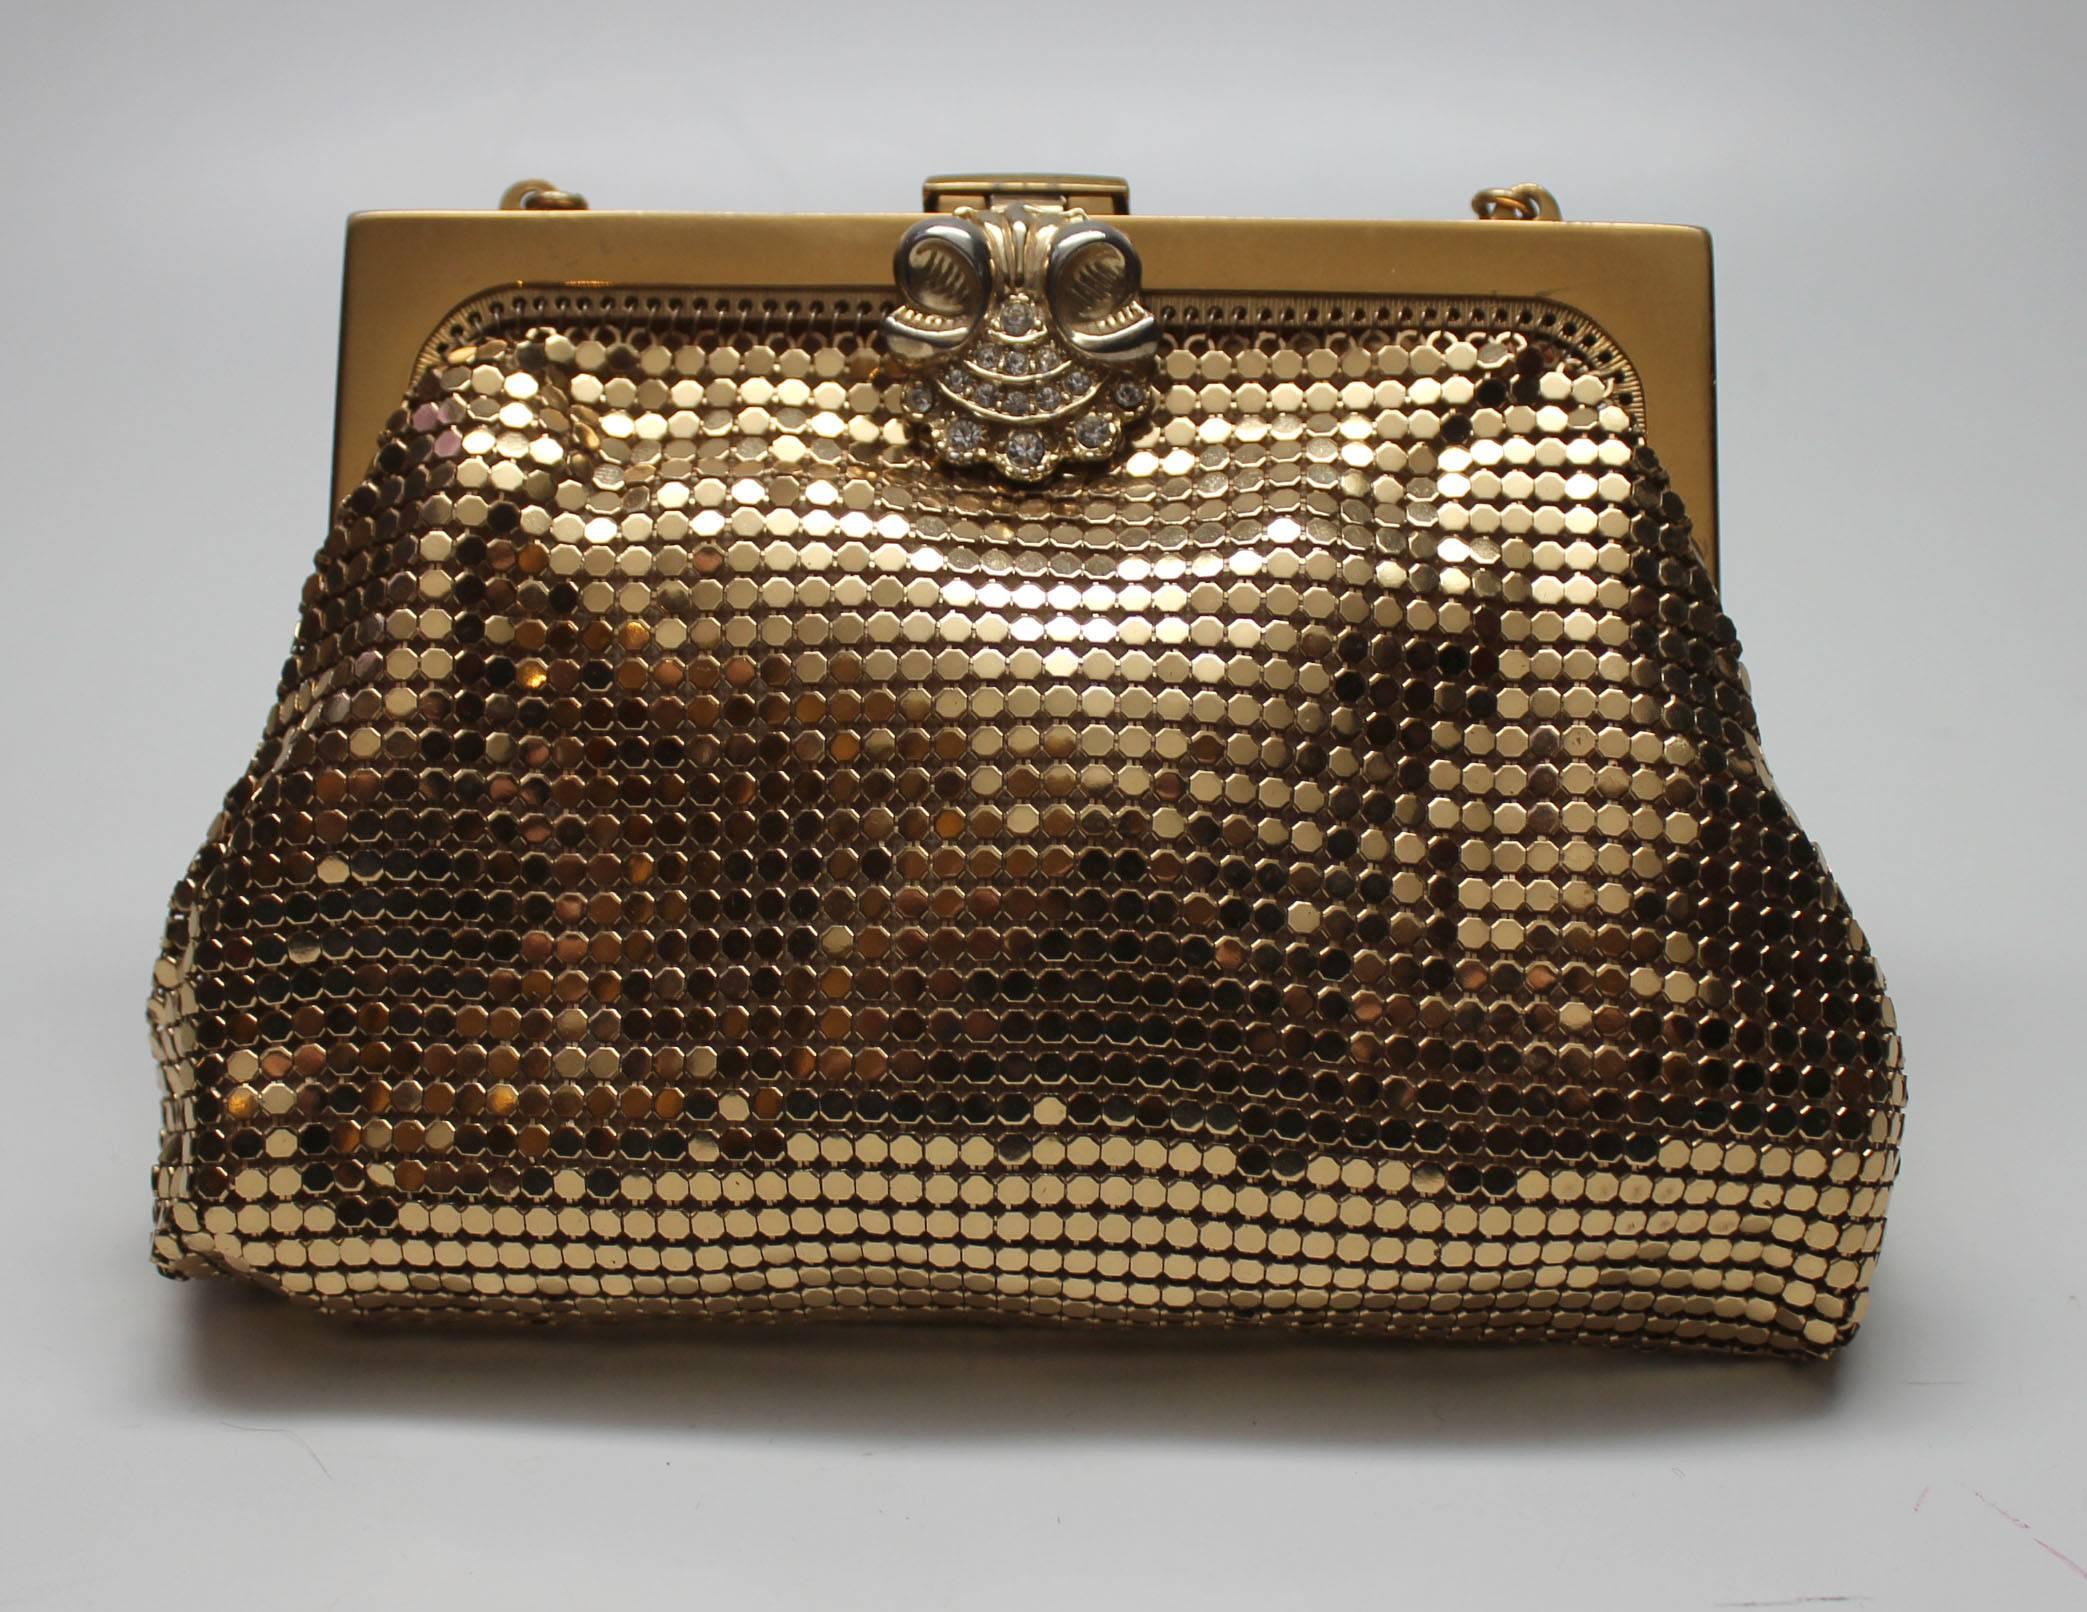 In 1937 Whiting & Davis teamed up with fashion designer Elsa Schiaparelli to create a collection of evening bags. The style was of finely crafted mesh featuring rhinestone clasps. This piece has those details with its sculptural clasp, rows of